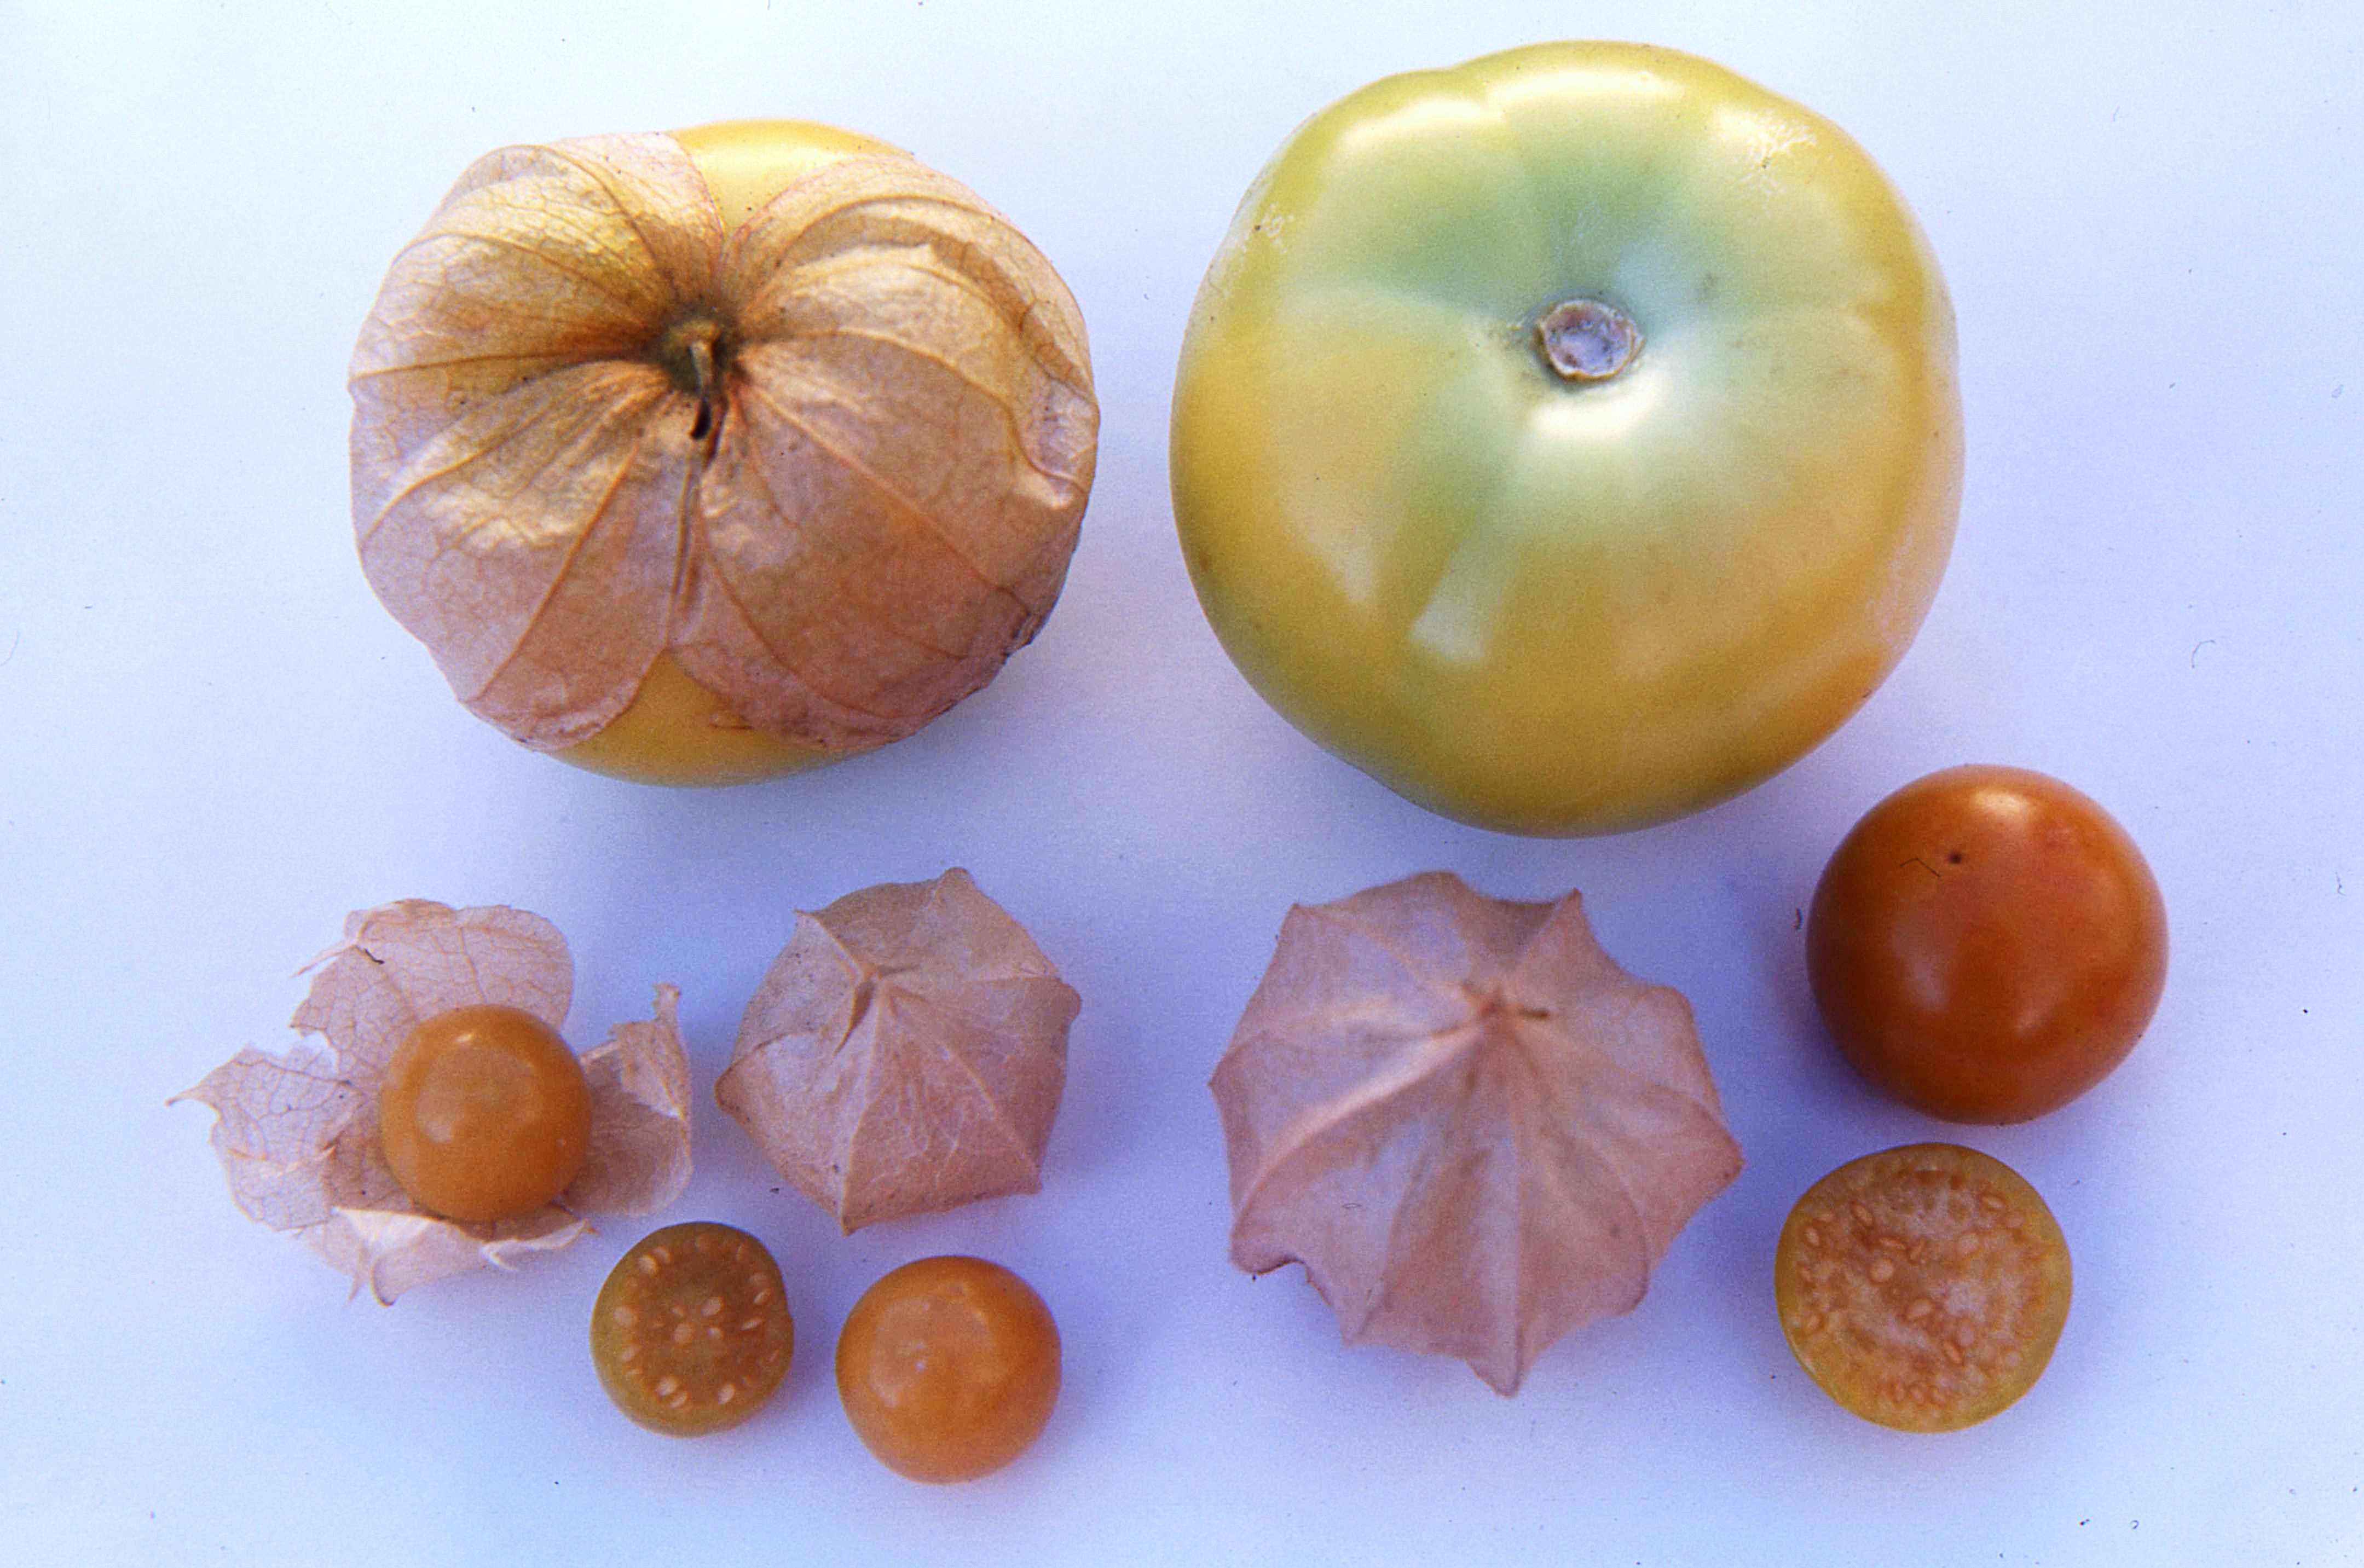 Cape gooseberry, ground cherry and tomatillo by Gail Thomas